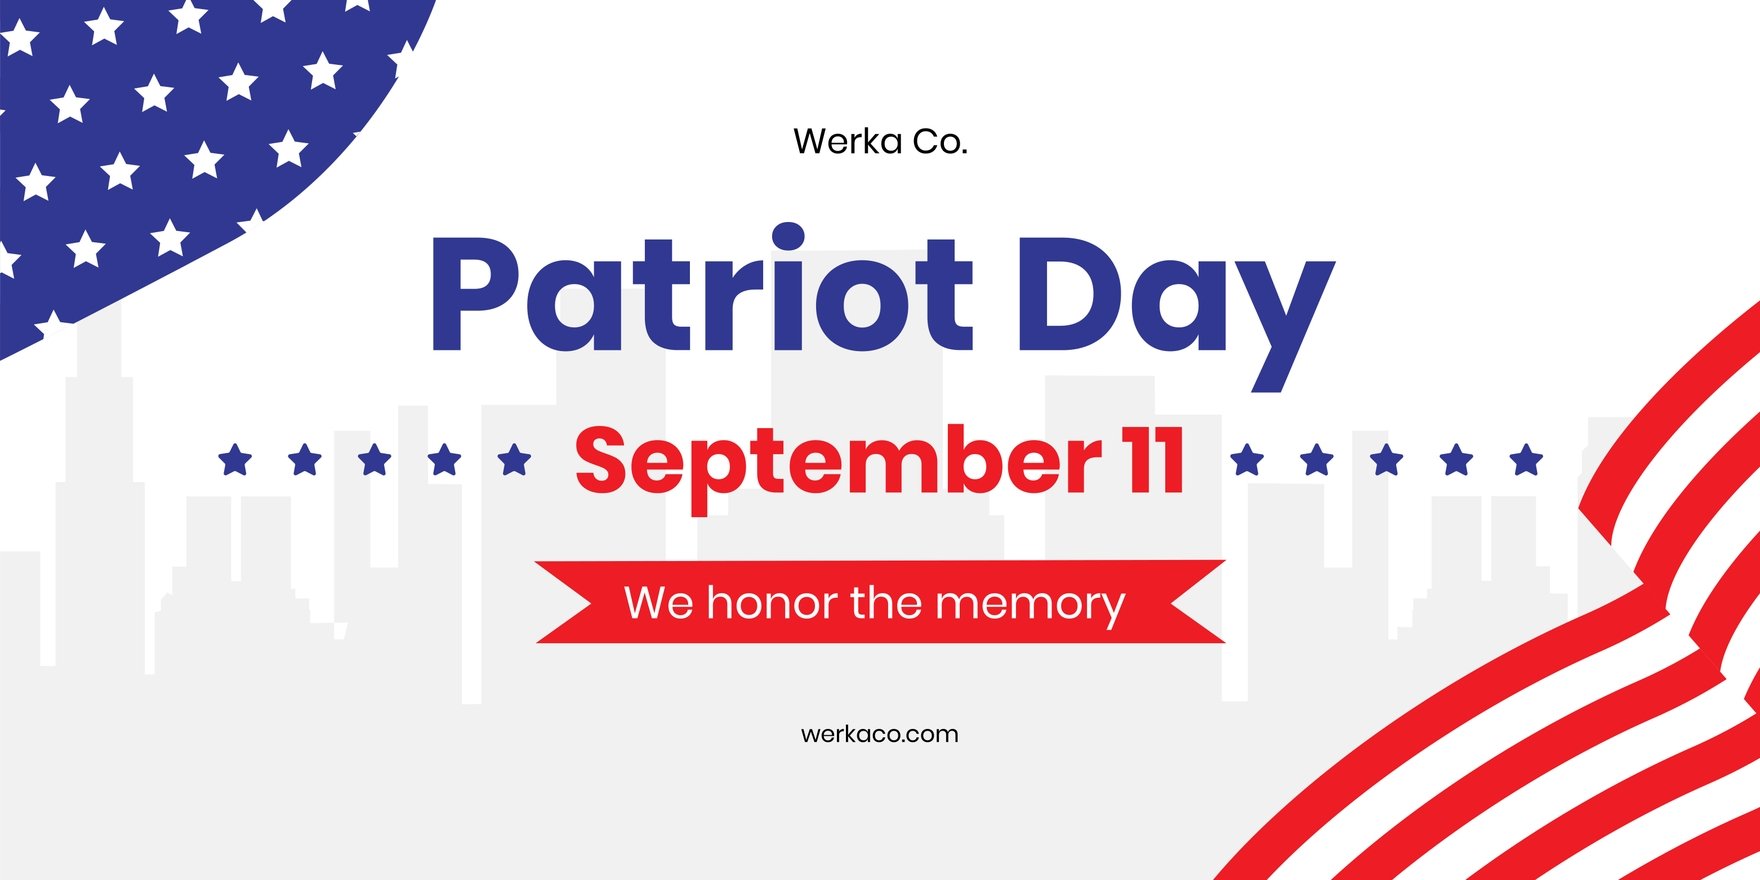 Free Modern Patriot Day Banner Template in Word, Google Docs, Illustrator, PSD, Apple Pages, Publisher